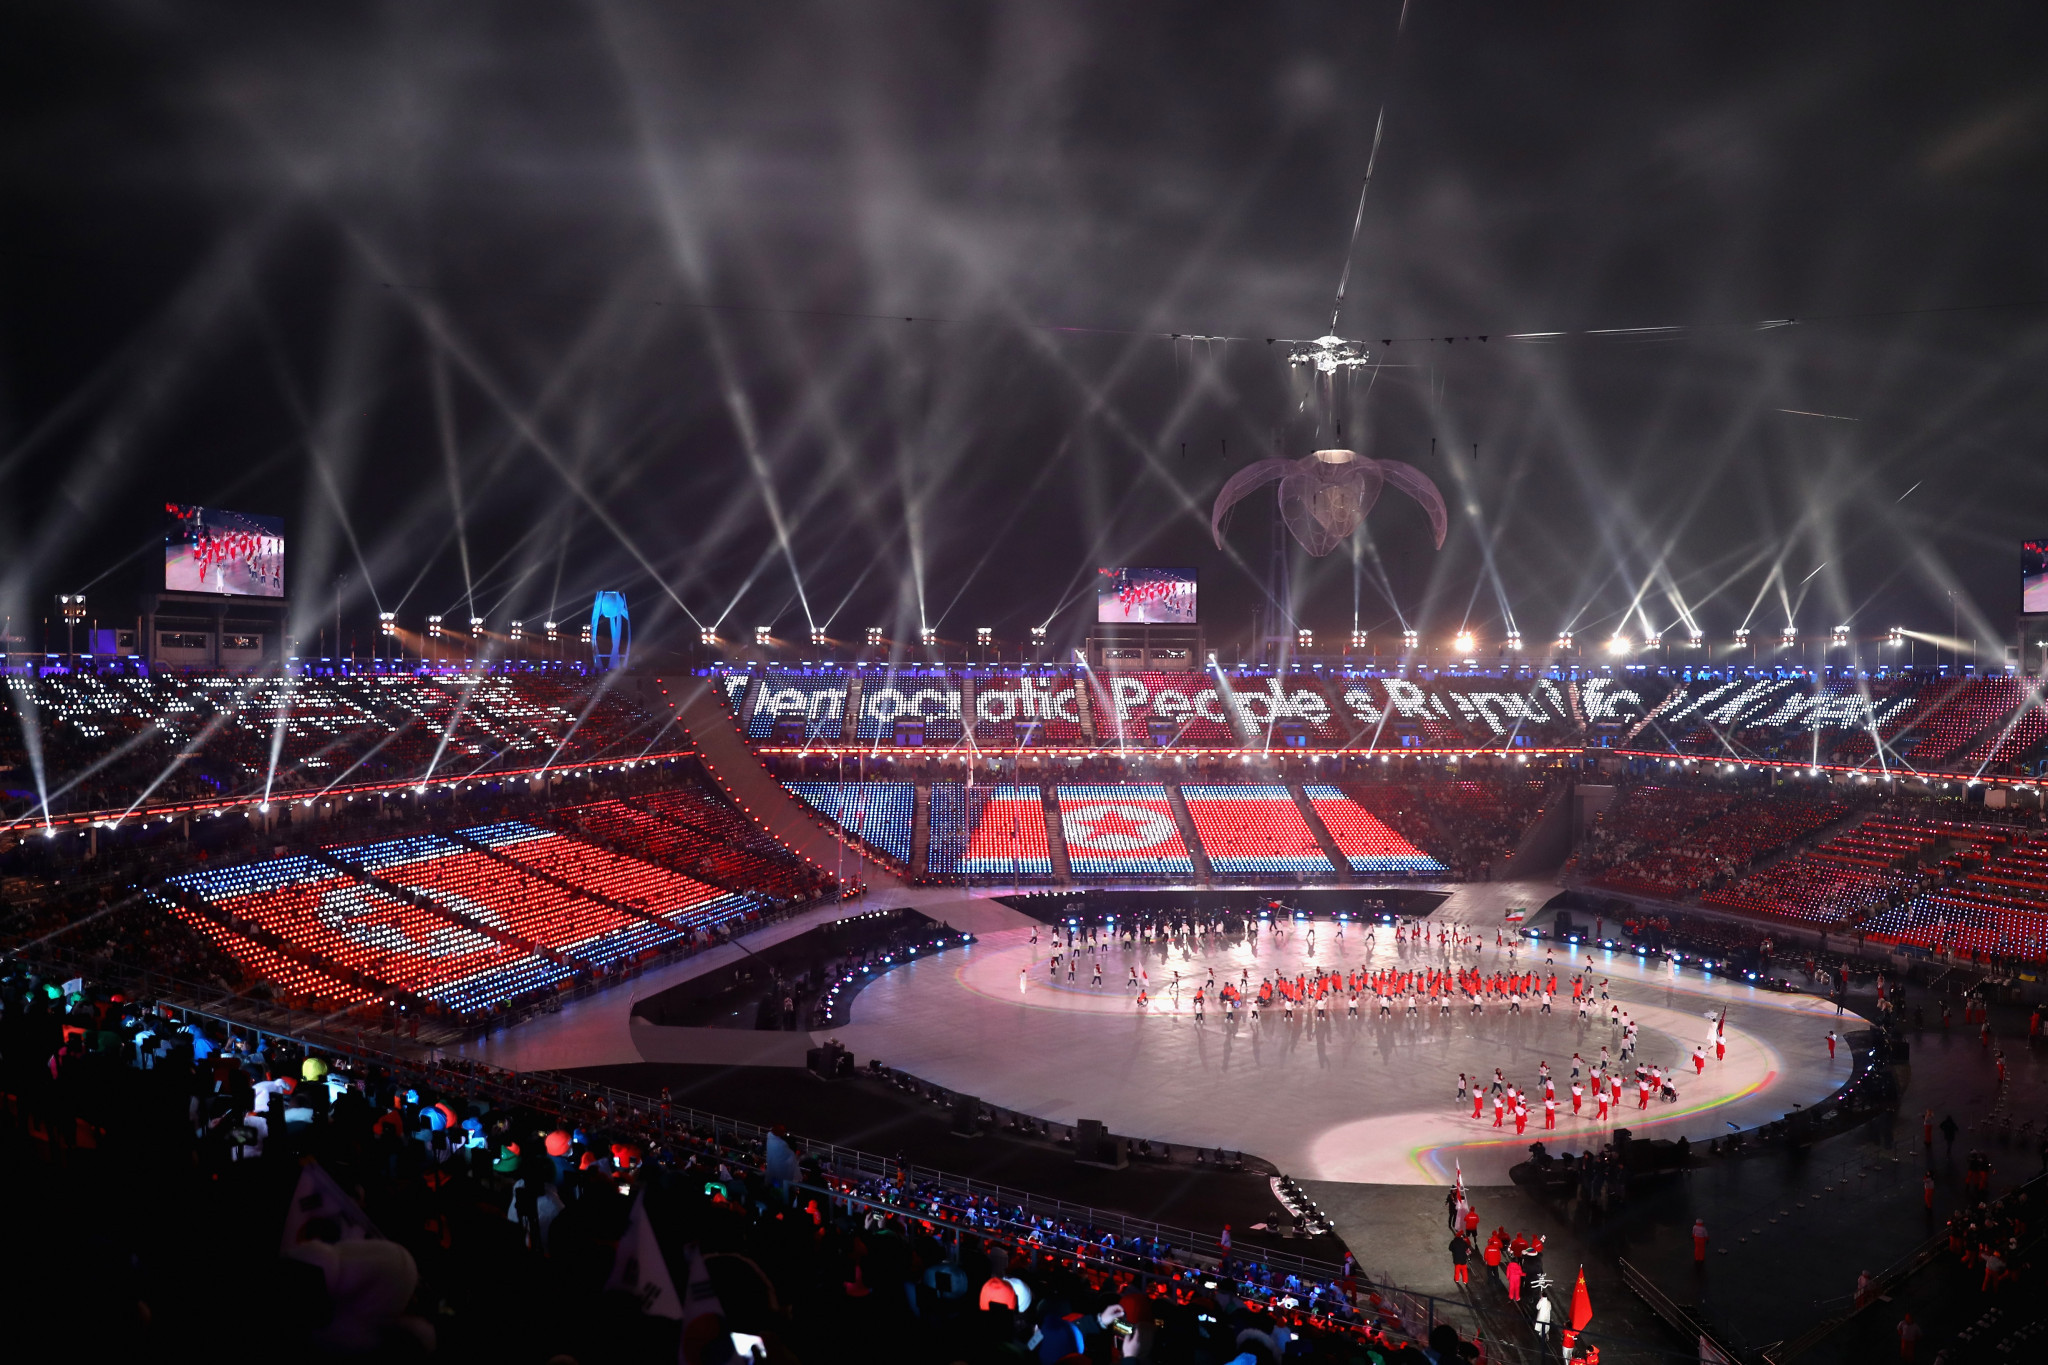 IOC confirm request made to United Nations to allow export of sports equipment into North Korea but US reportedly block it